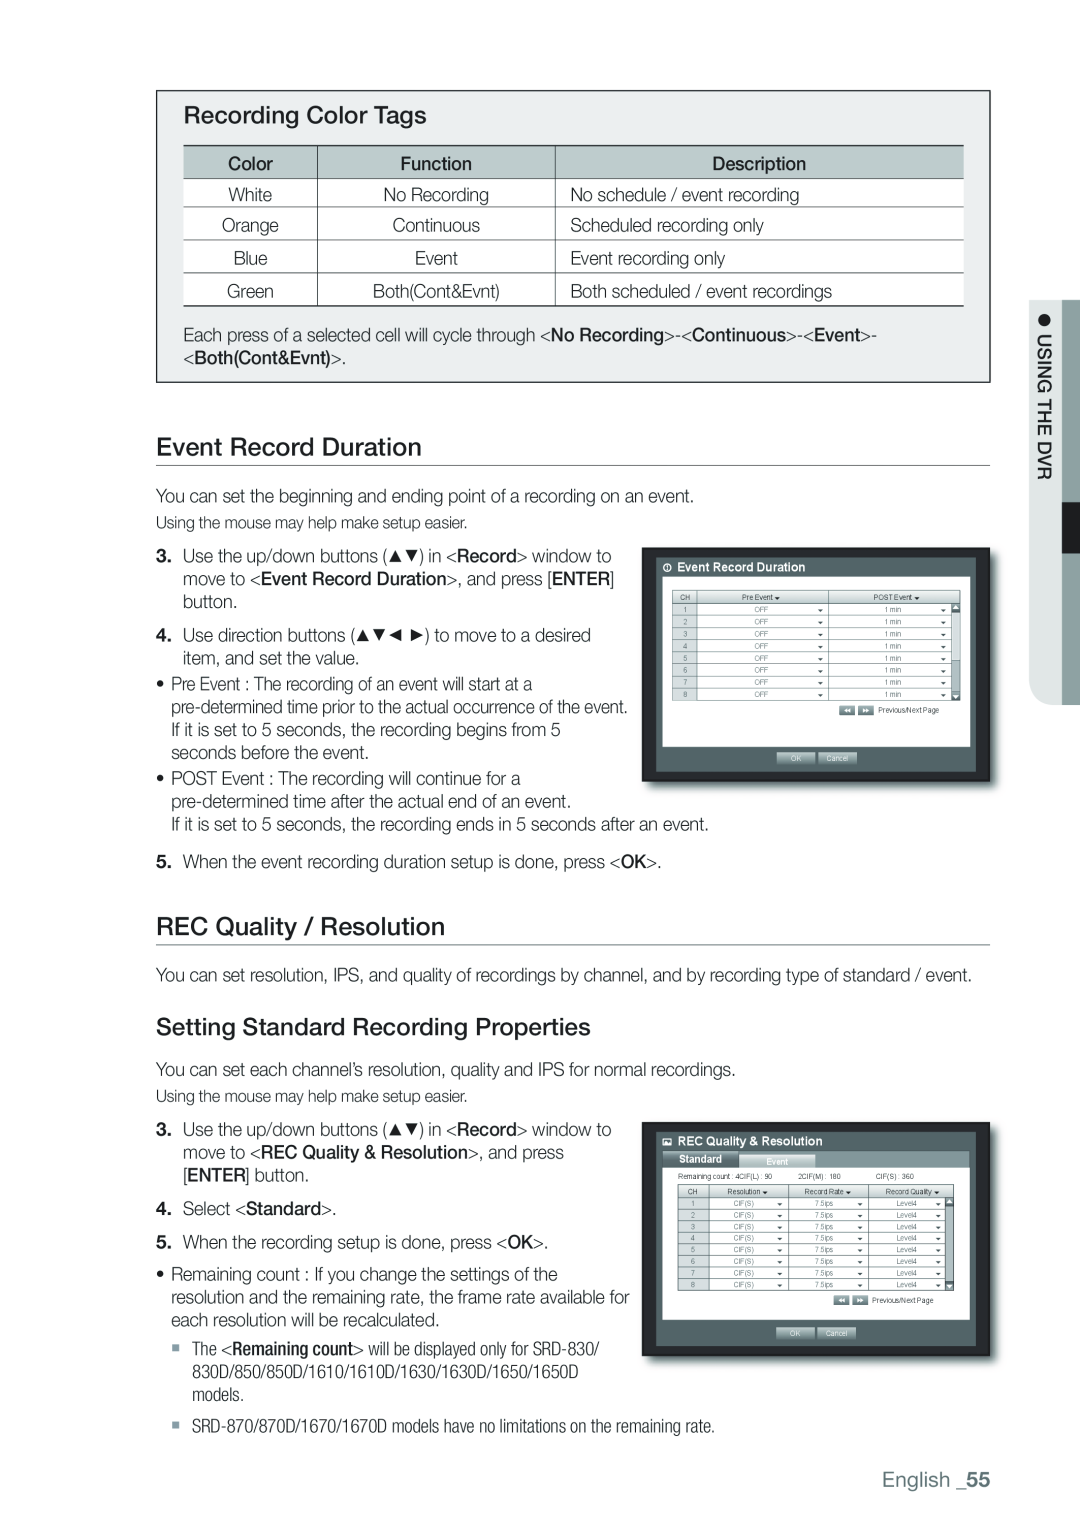 Samsung 1650D Event Record Duration, REC Quality / Resolution, Recording Color Tags, Setting Standard Recording Properties 